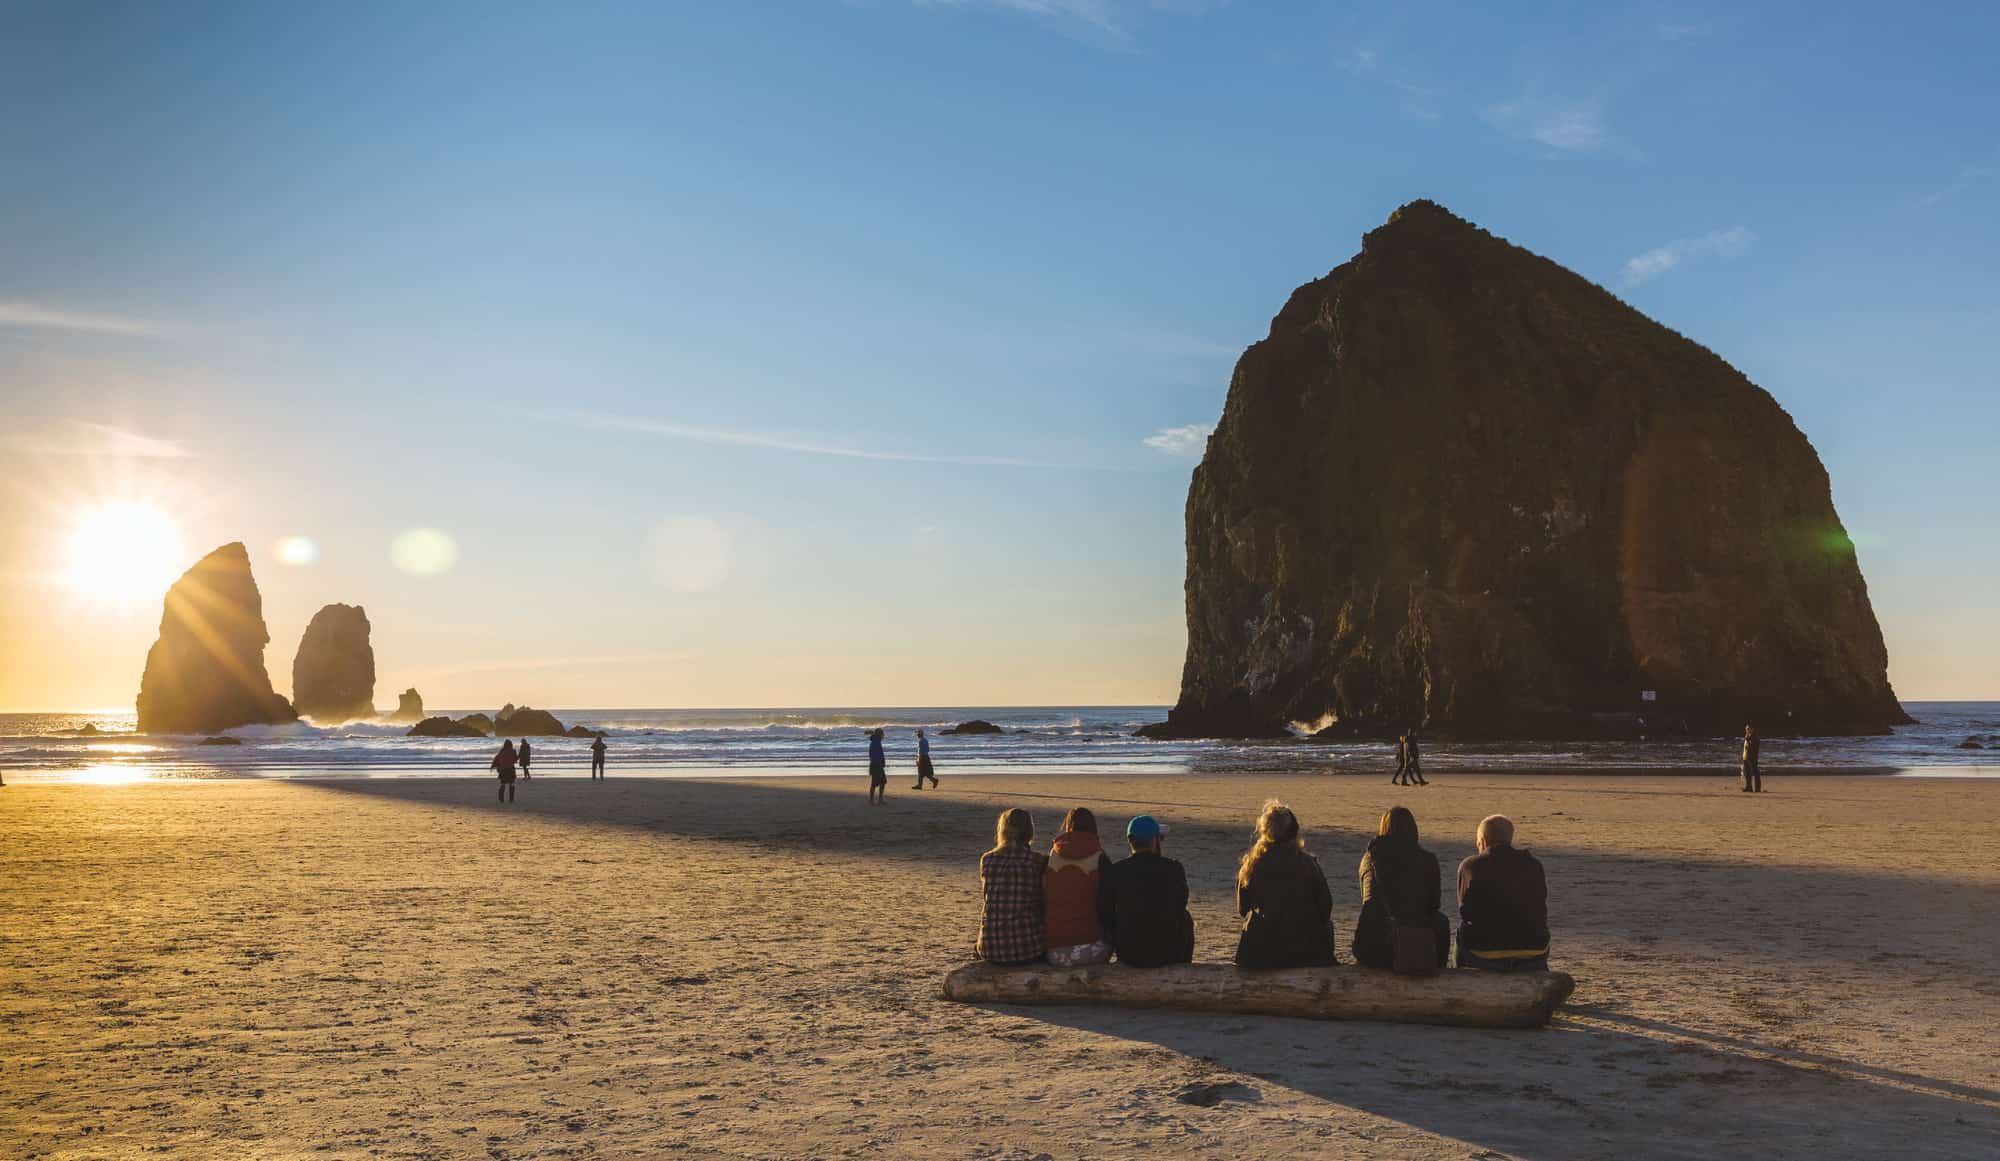 The beautiful, ancient monoliths at Cannon Beach make for a picturesque evening.